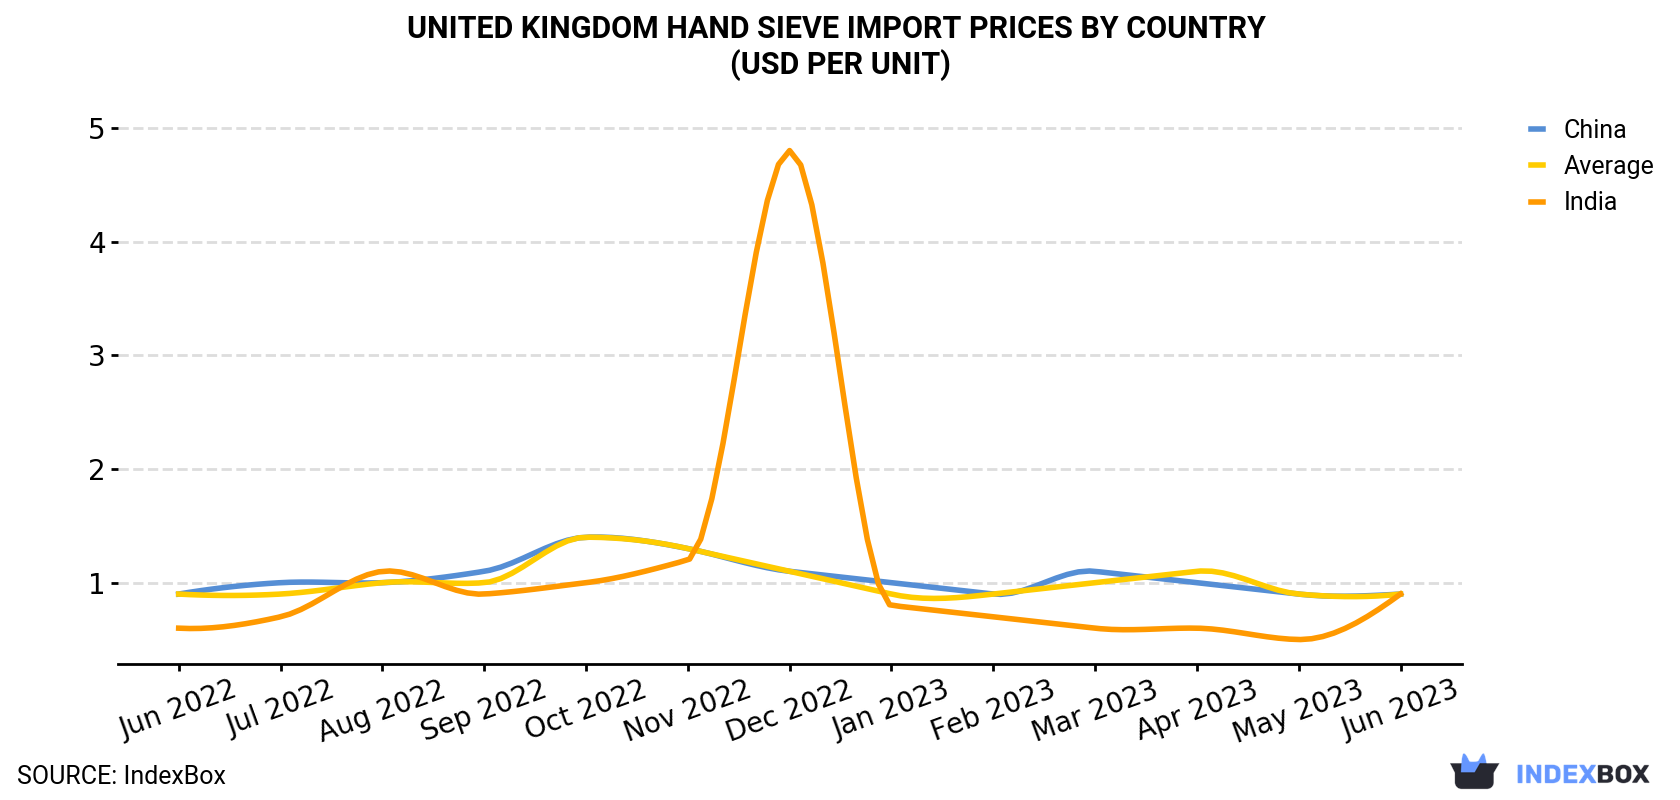 United Kingdom Hand Sieve Import Prices By Country (USD Per Unit)